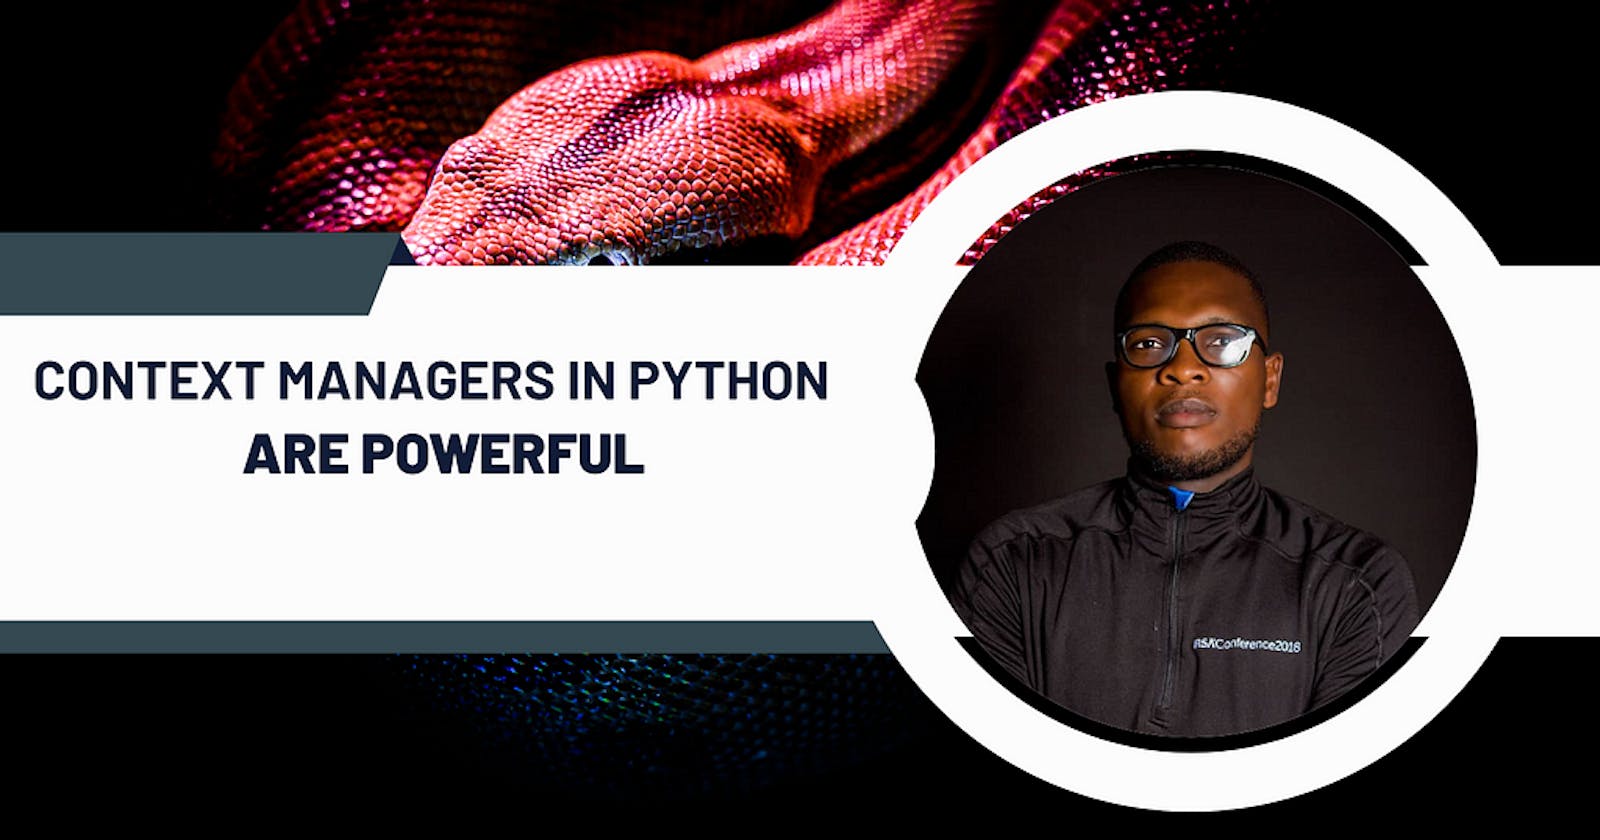 Python context managers are powerful